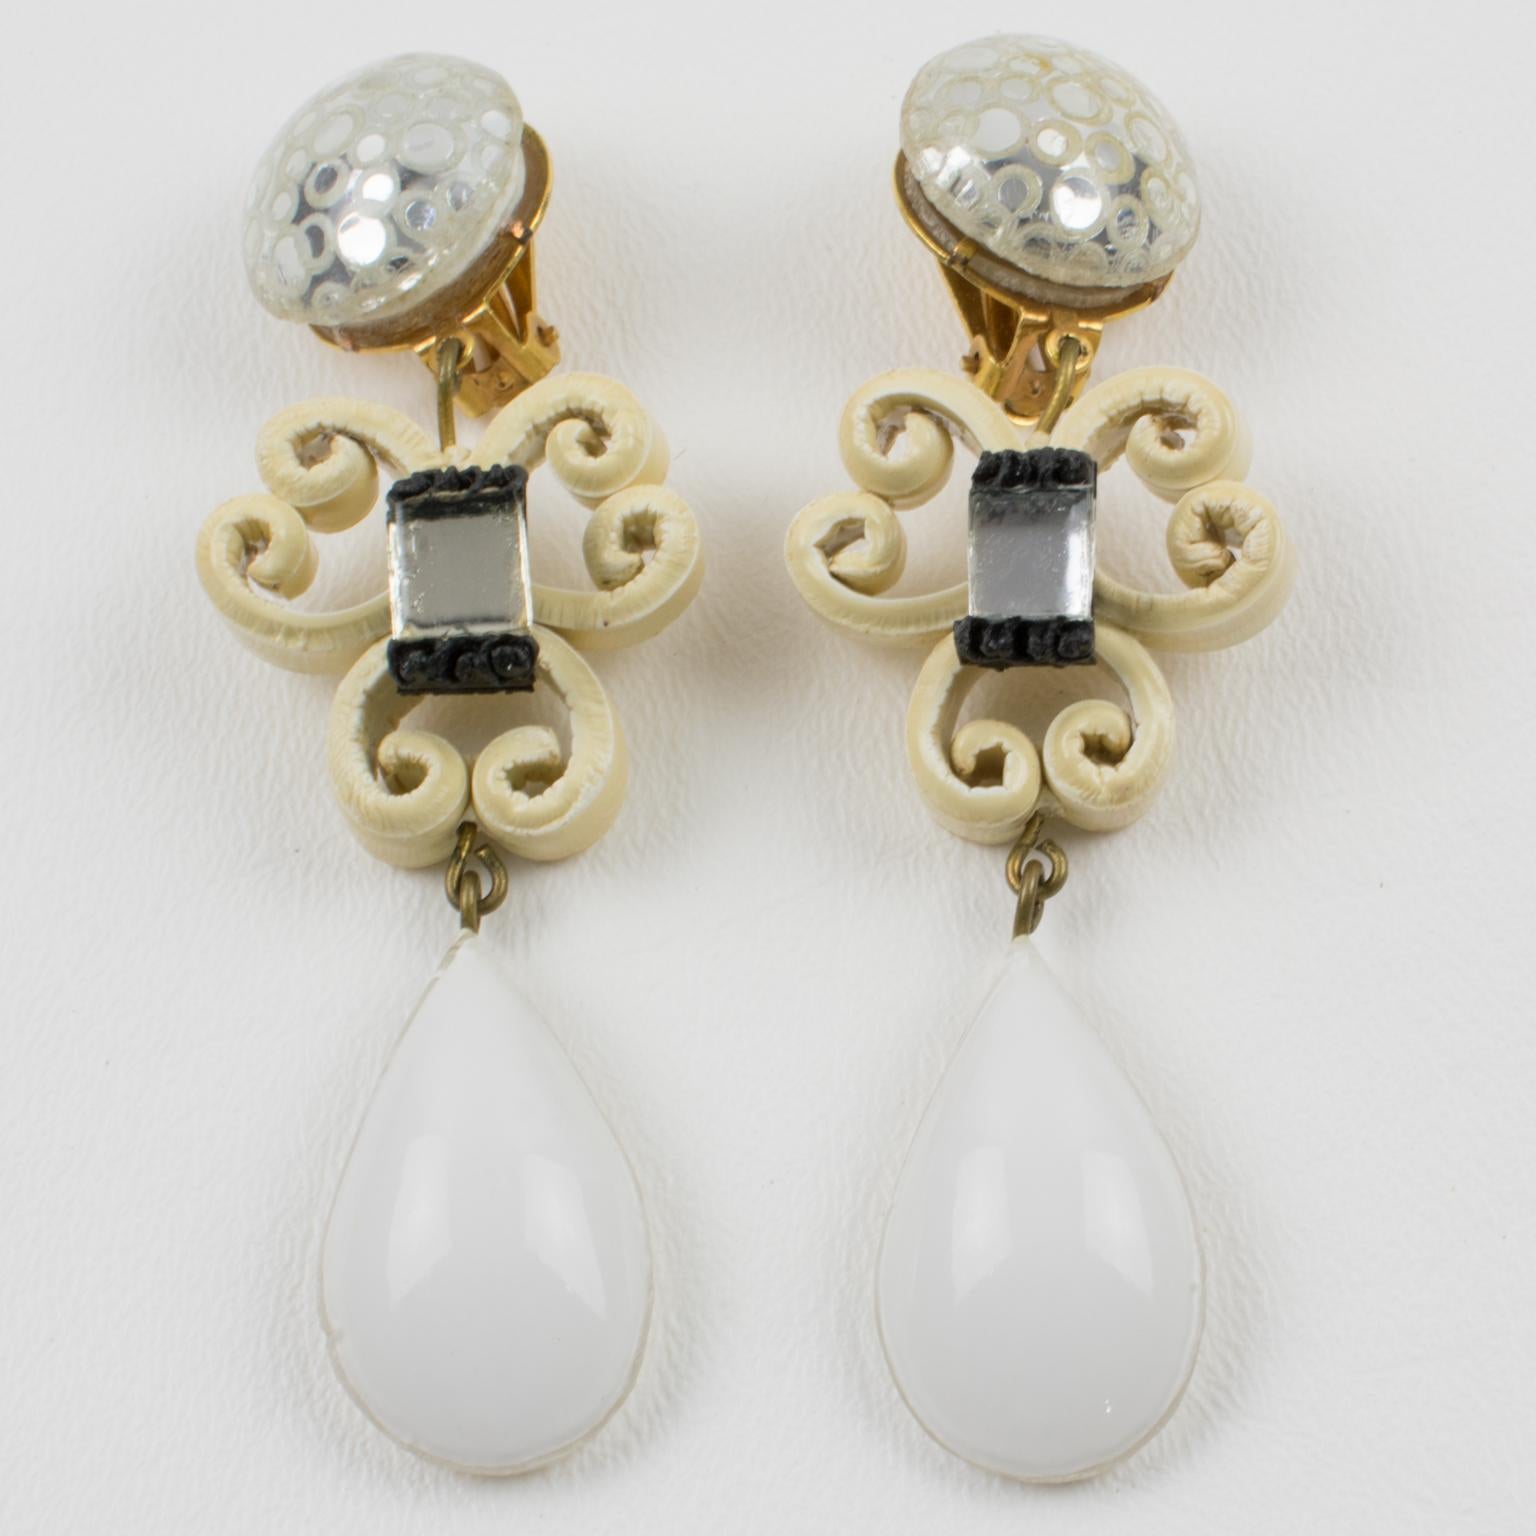 Cilea Paris designed these charming dimensional dangling hand-made clip-on earrings. They feature baroque-inspired artisanal geometric elements with textured patterns built together to form a powerful statement piece. The pieces boast white, ivory,